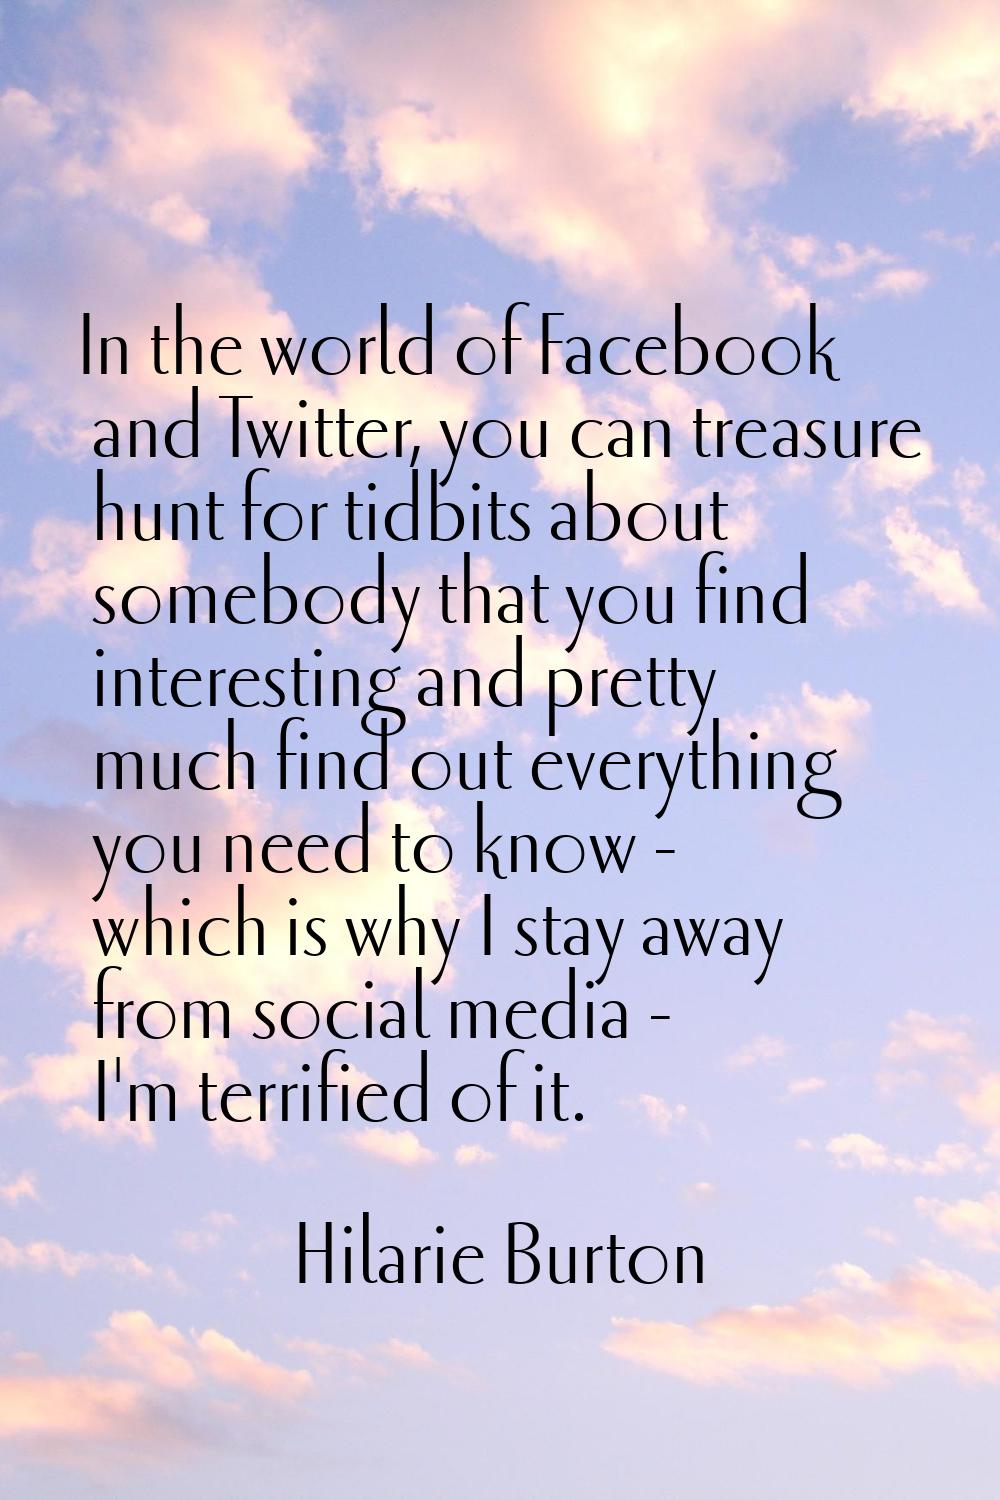 In the world of Facebook and Twitter, you can treasure hunt for tidbits about somebody that you fin